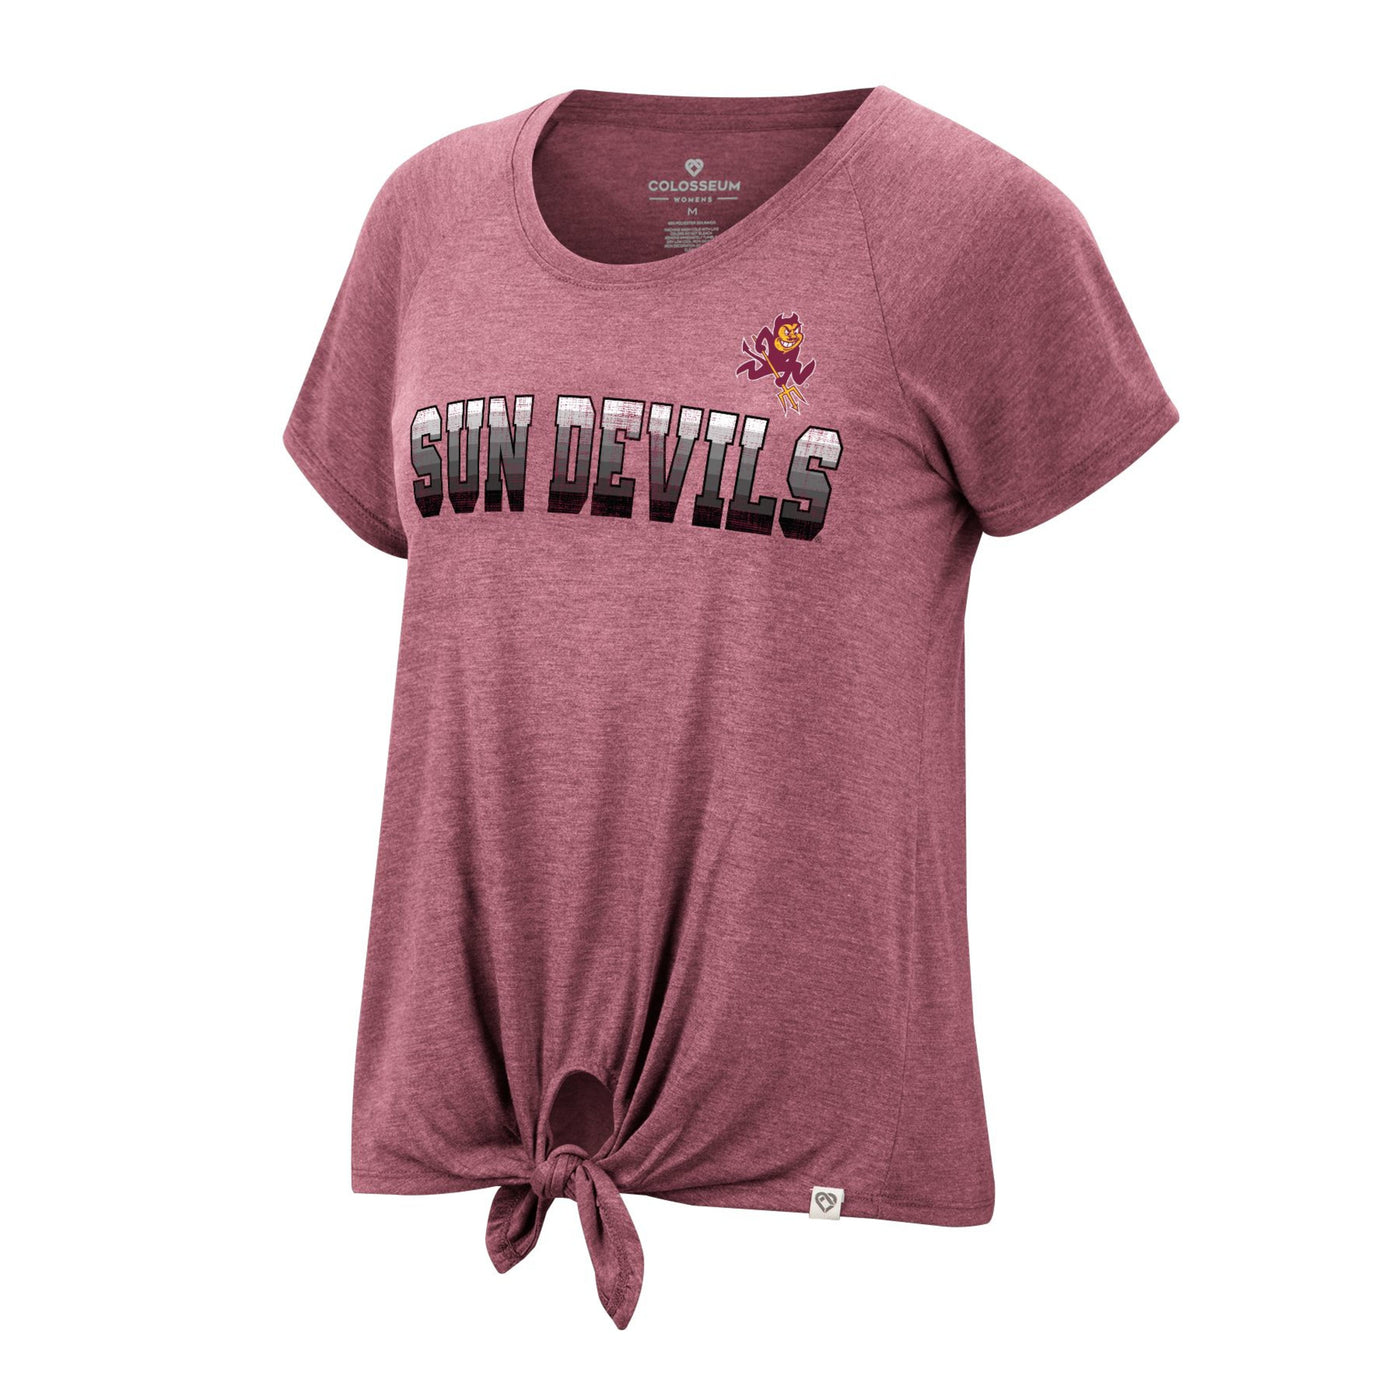 ASU maroon women's tee with tie front and 'Sun Devils' lettering with Sparky in the upper corner